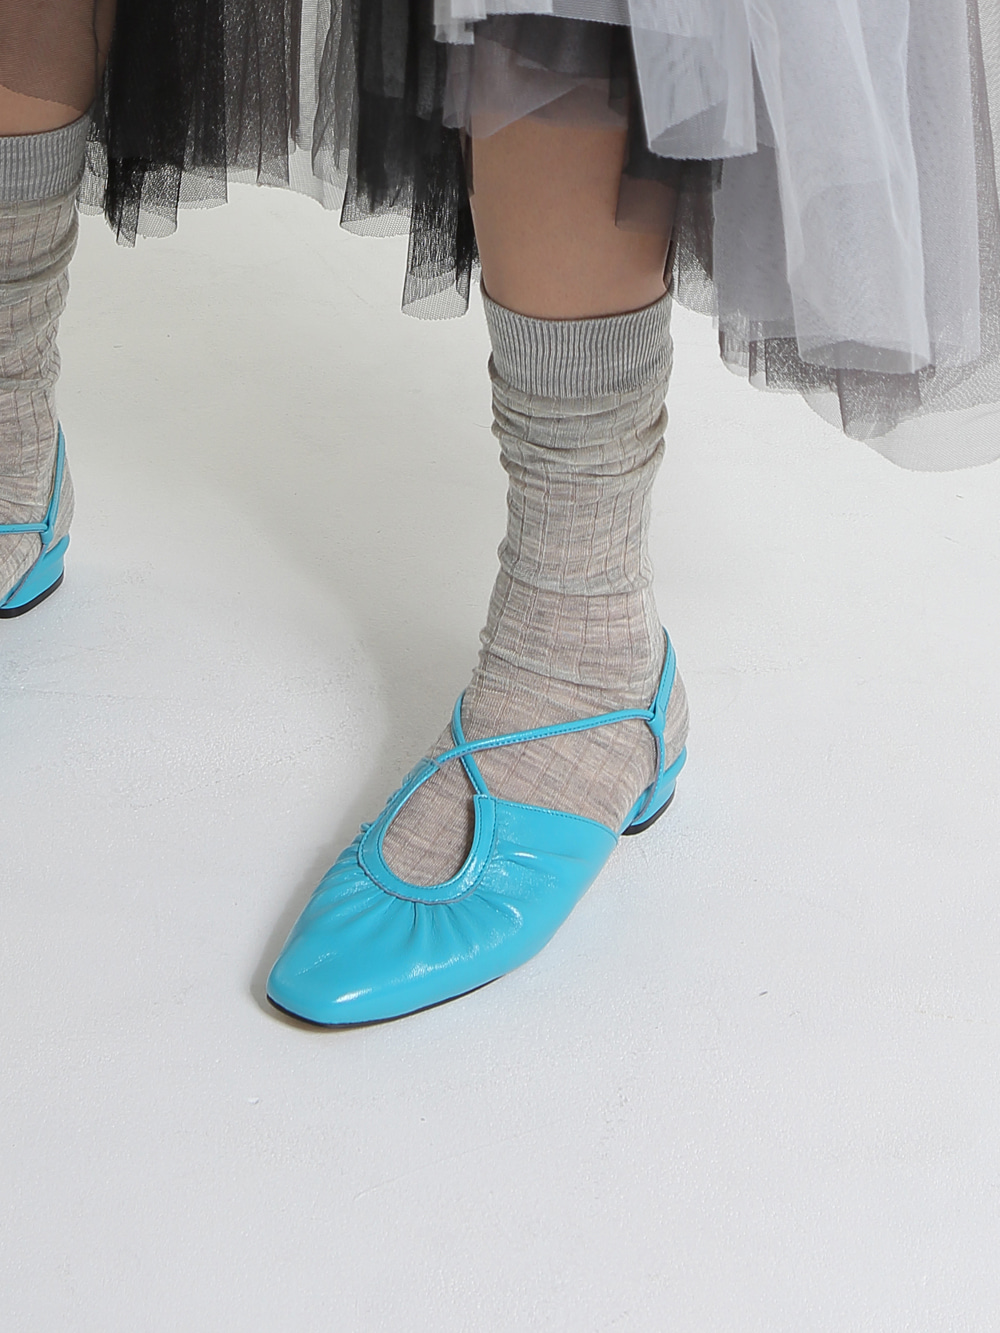 French ballet shoes glossy  Turquoise